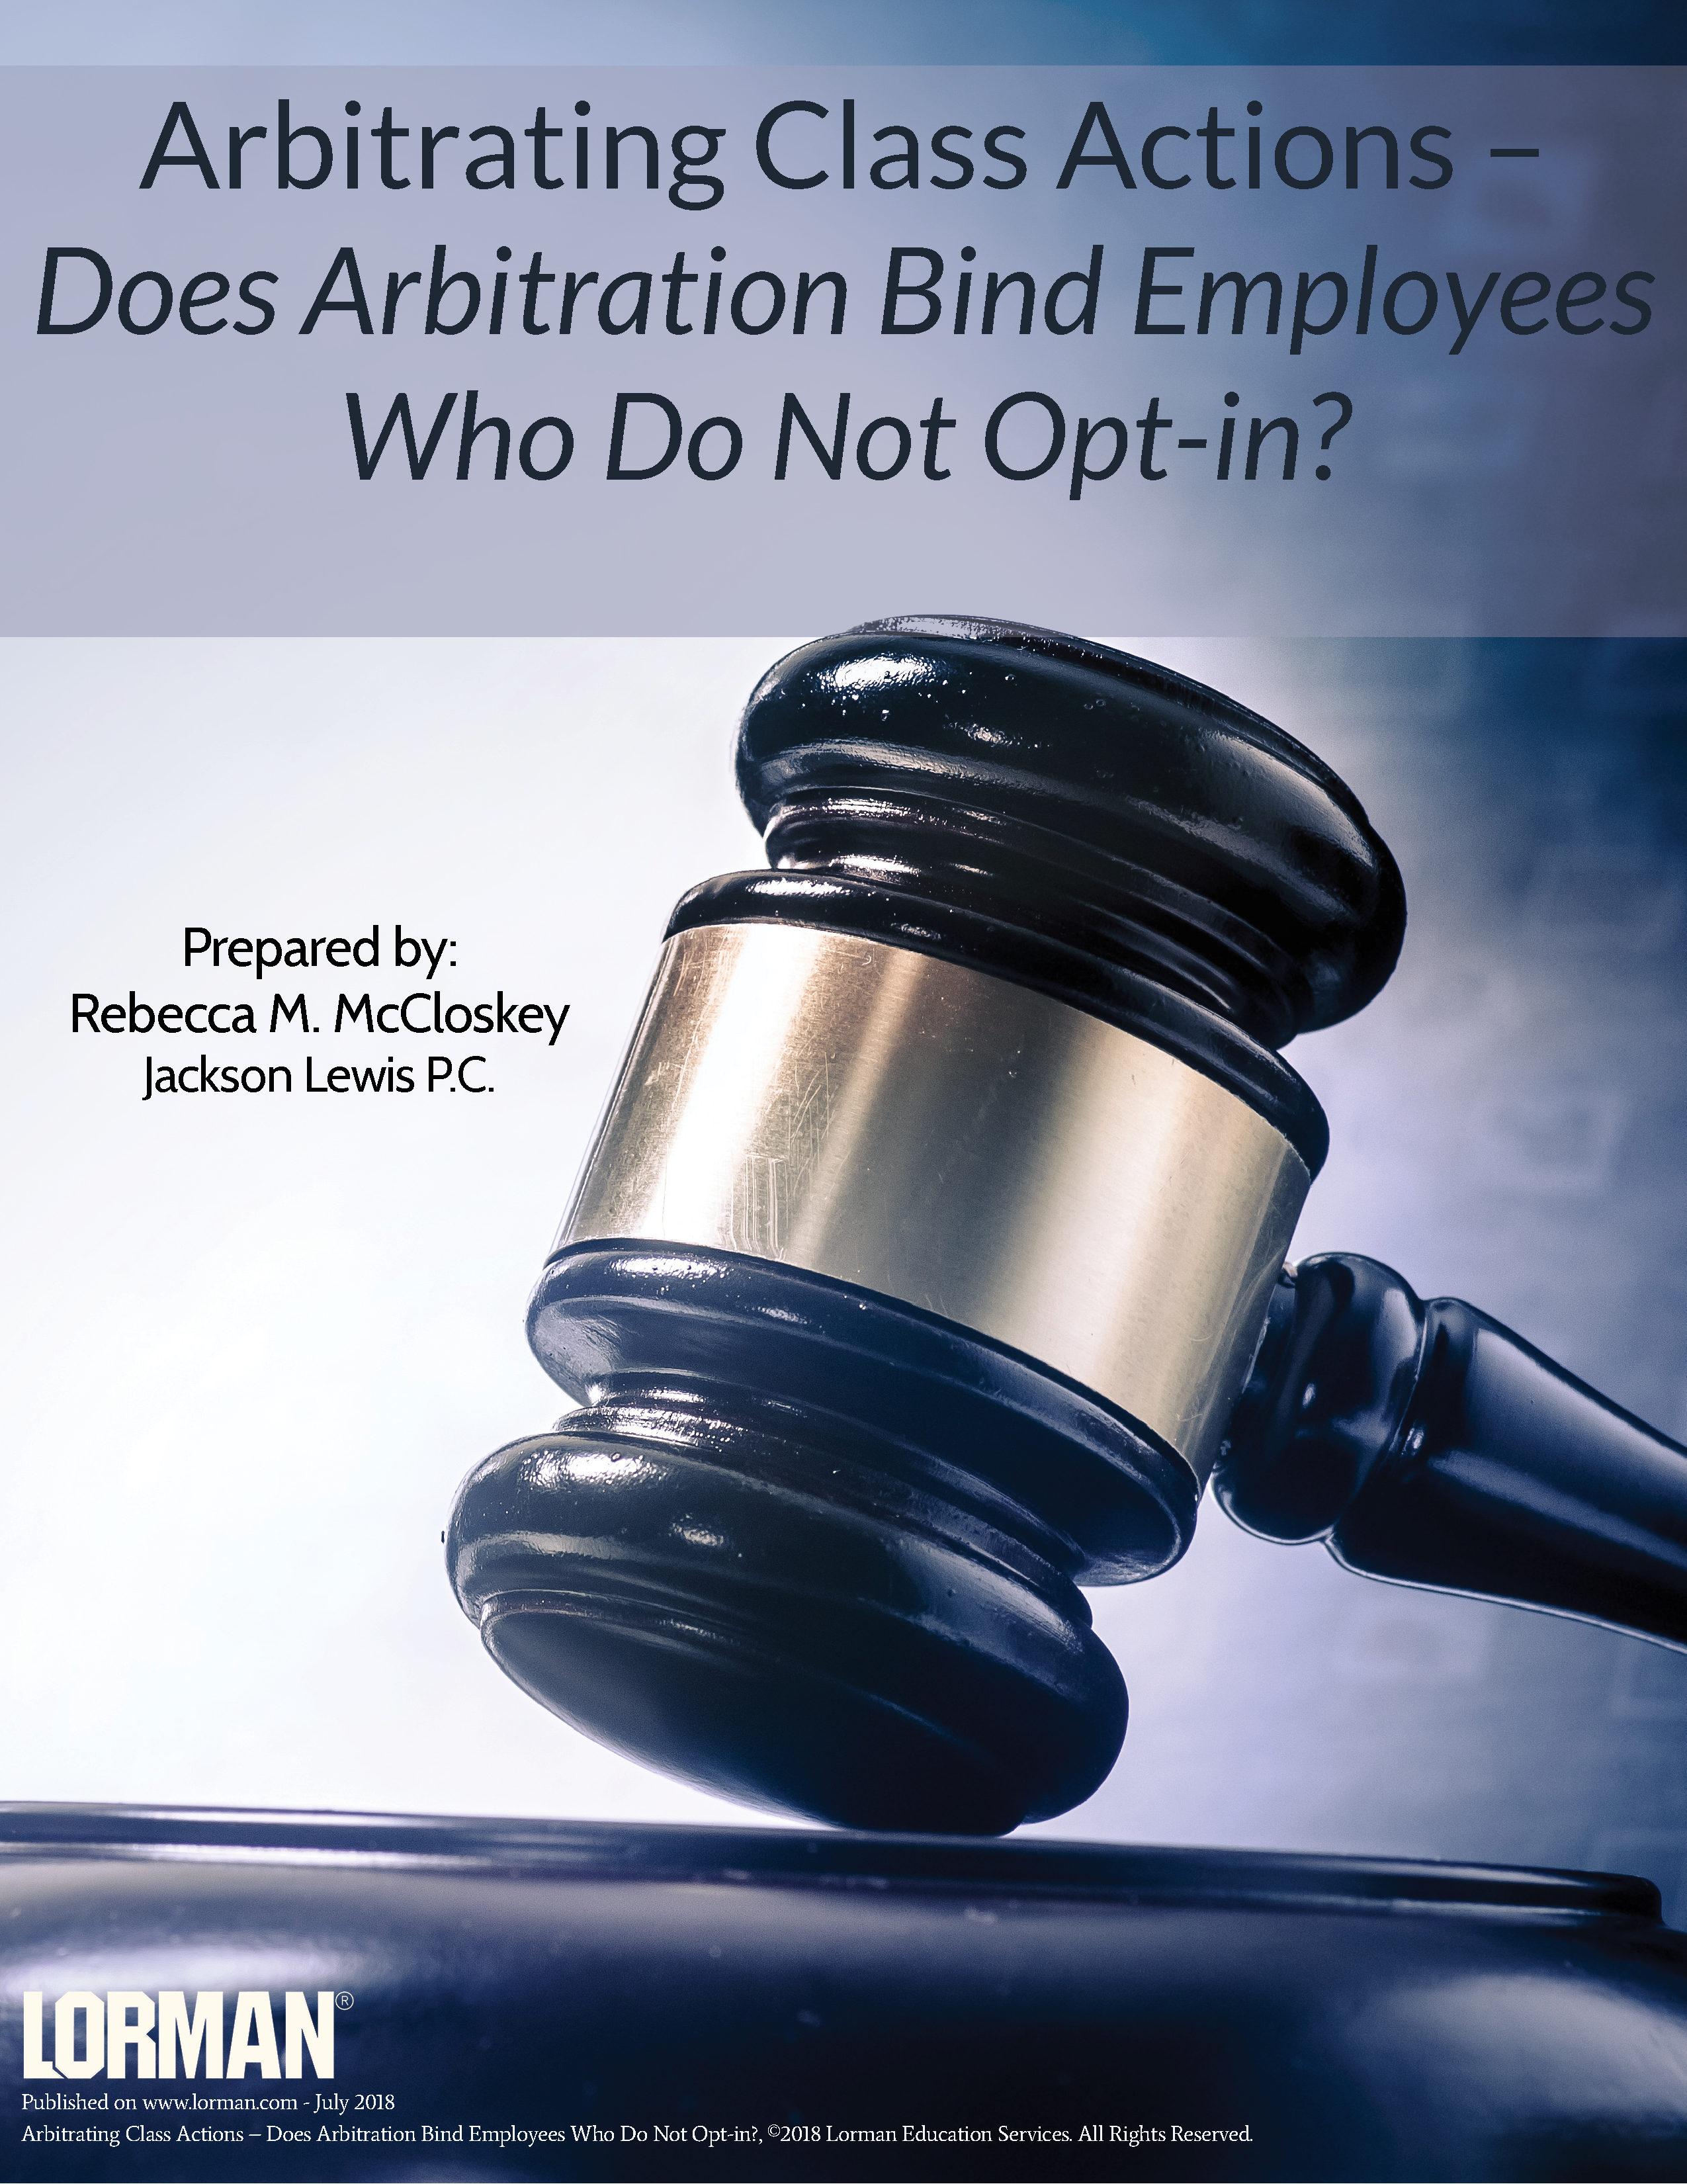 Arbitrating Class Actions – Does Arbitration Bind Employees Who Do Not Opt-in?